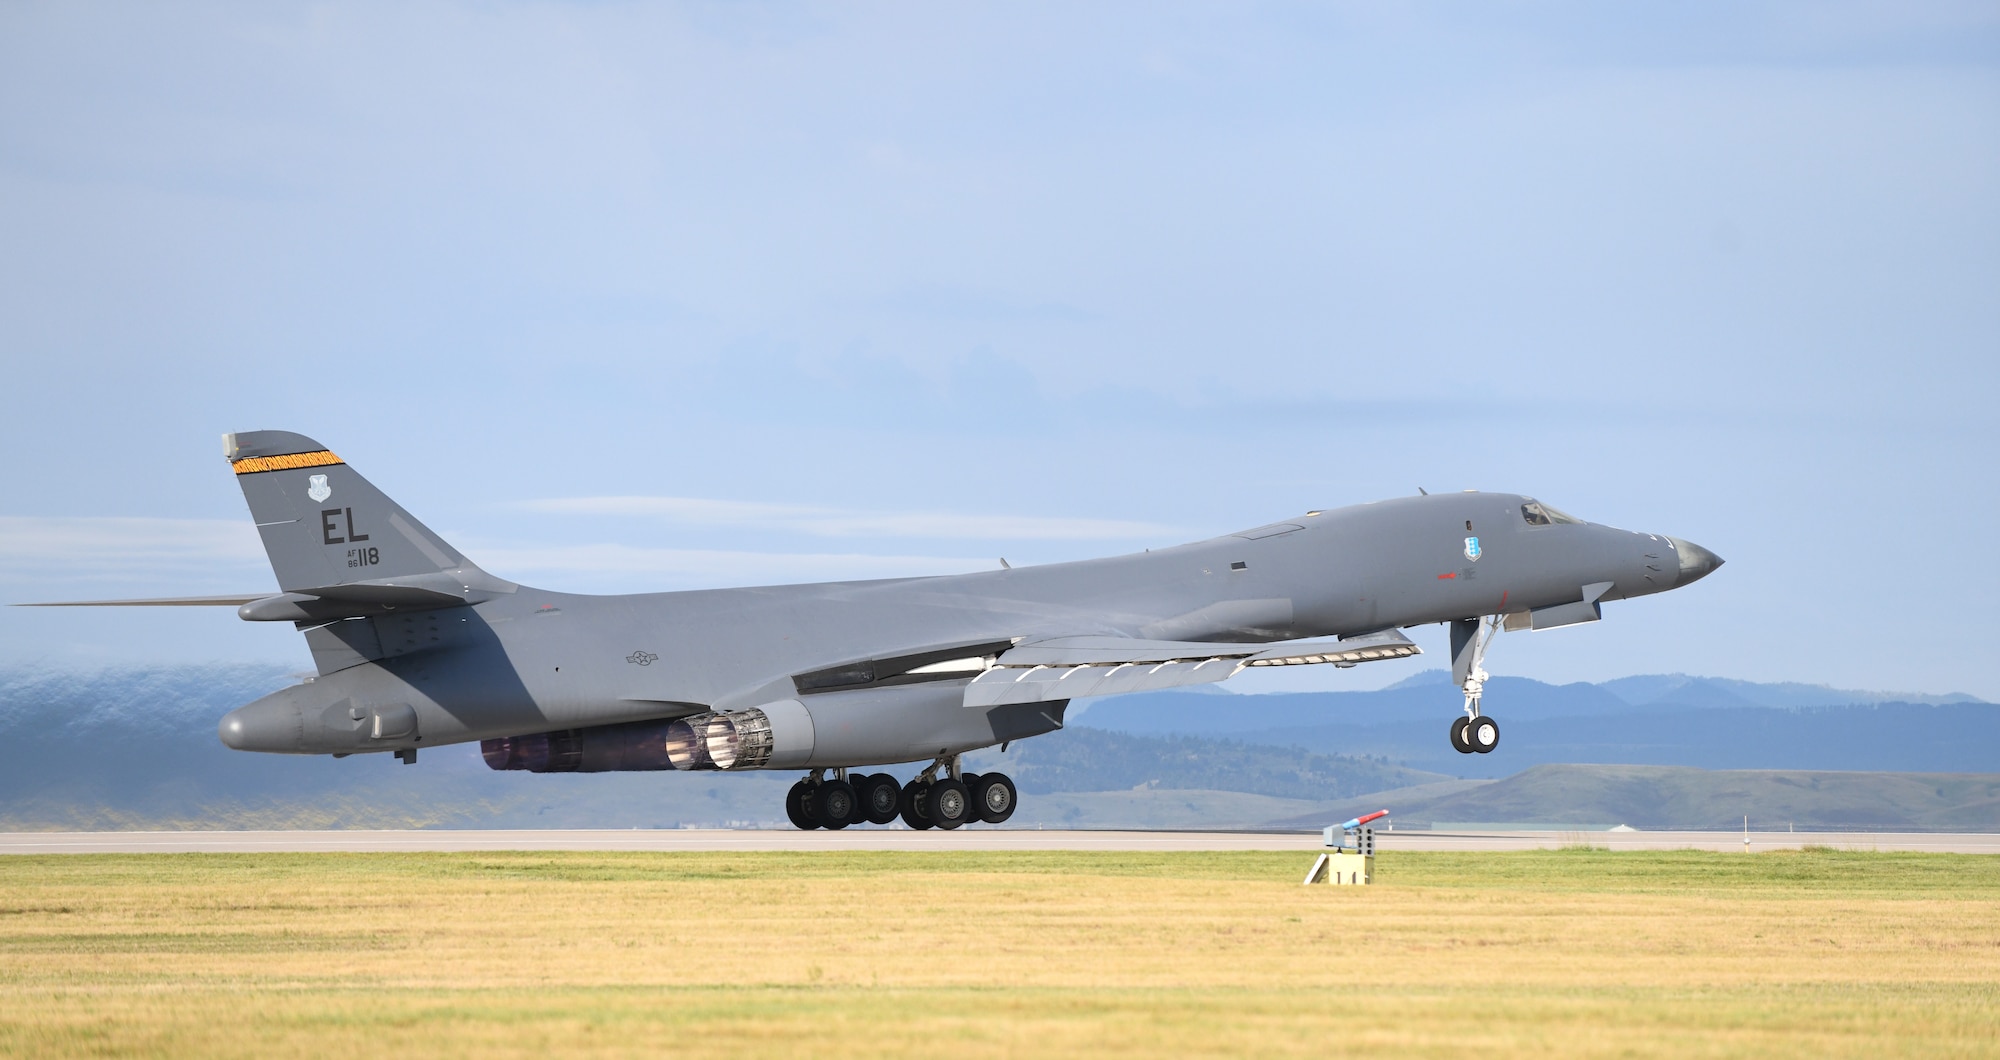 A B-1B Lancer takes off on Ellsworth Air Force Base, S.D., Sept. 10, 2019. Ellsworth AFB is home to the 28th Bomb Wing – the largest B-1 combat wing in the U.S. Air Force. Ellsworth currently has a fleet of 27 B-1B’s. (U.S. Air Force photo by Airman 1st Class Christina Bennett)